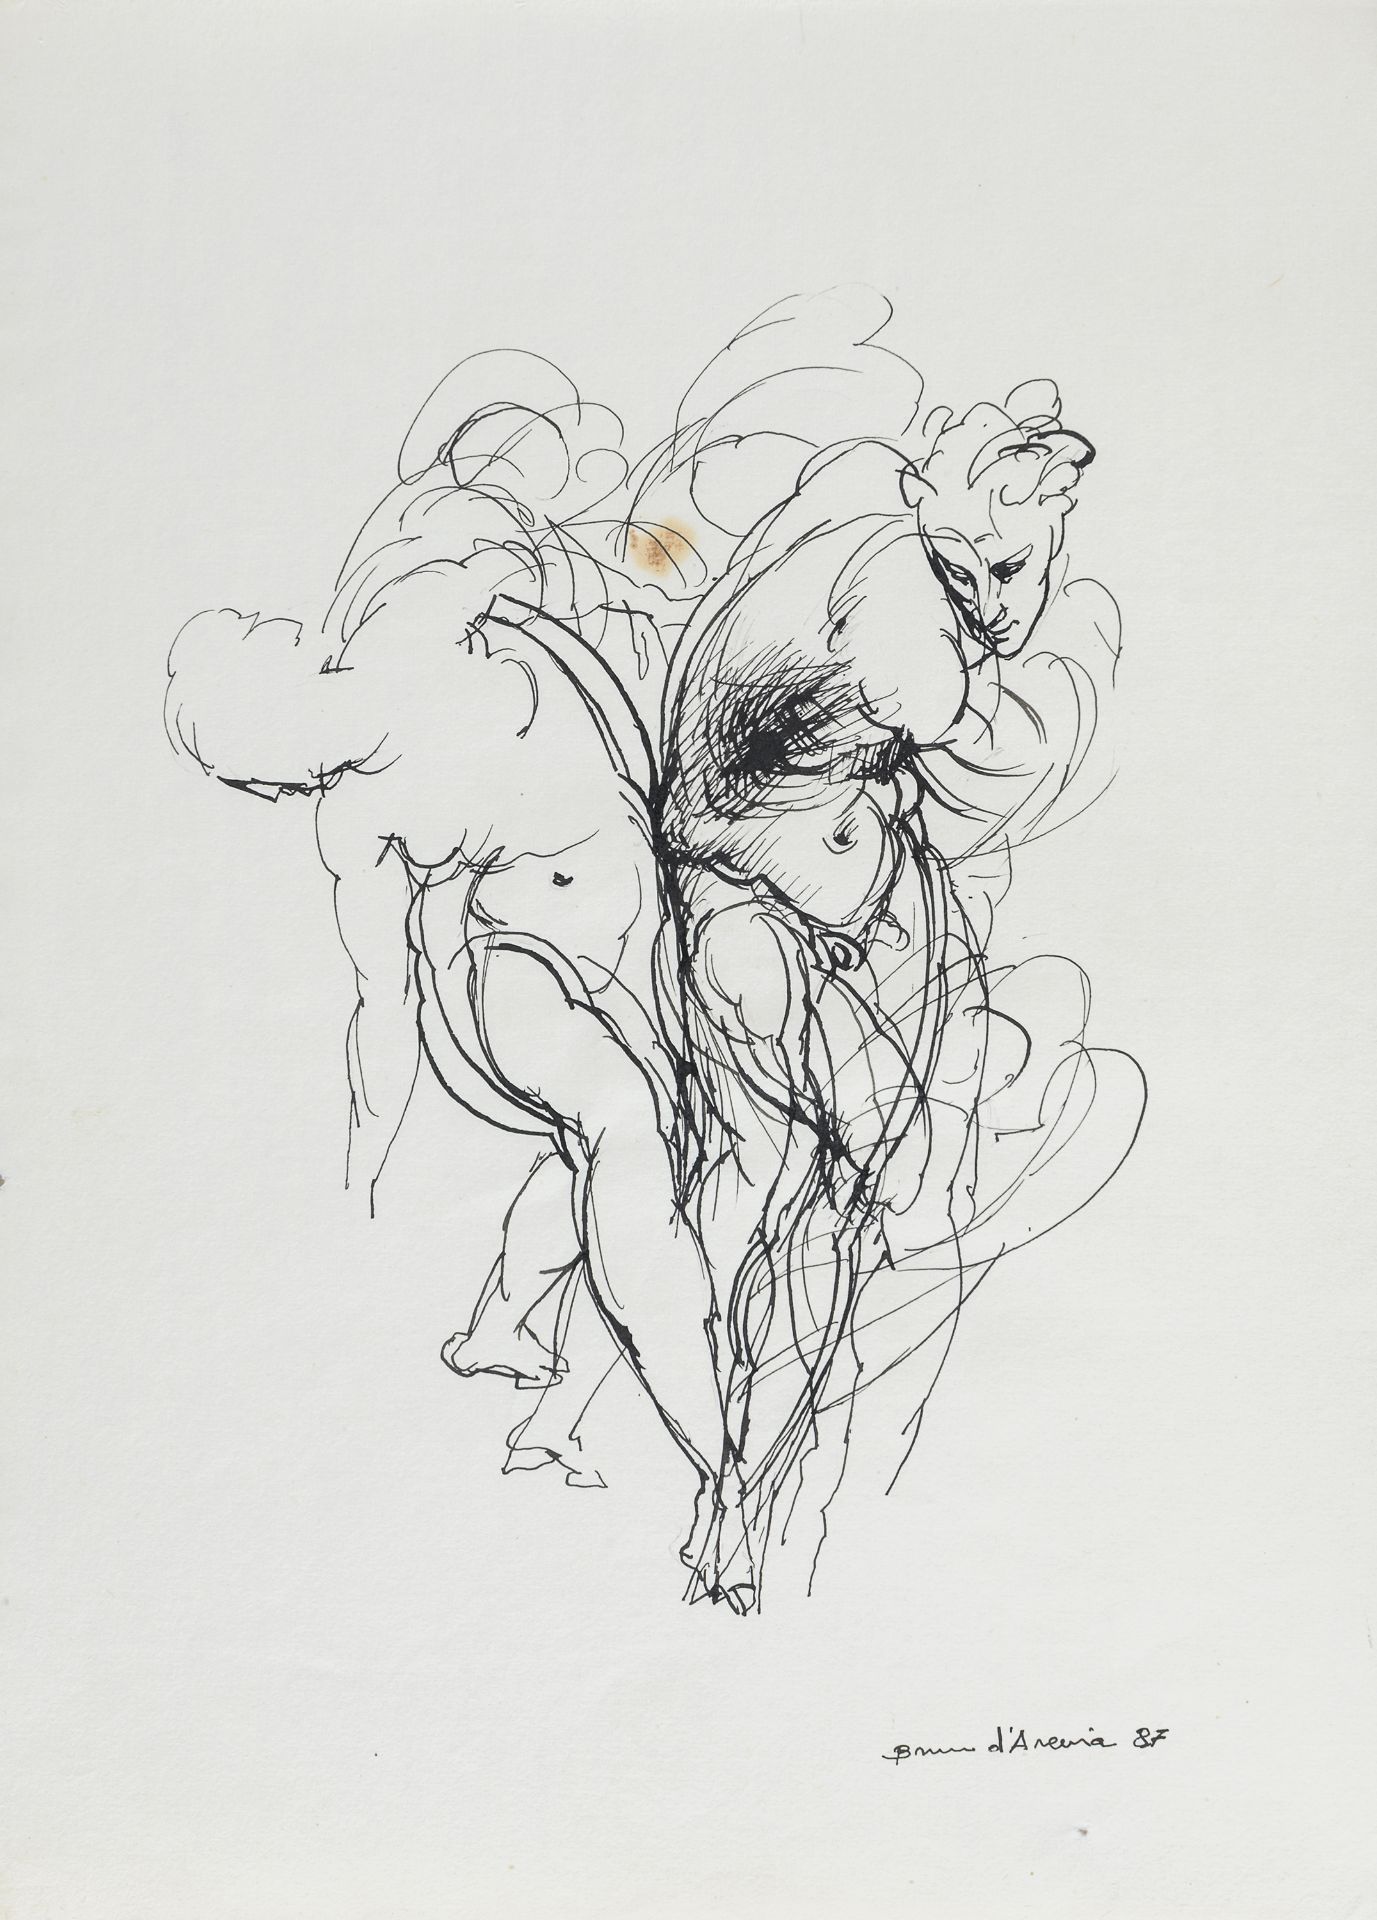 INK DRAWING BY BRUNO D'ARCEVIA 1987